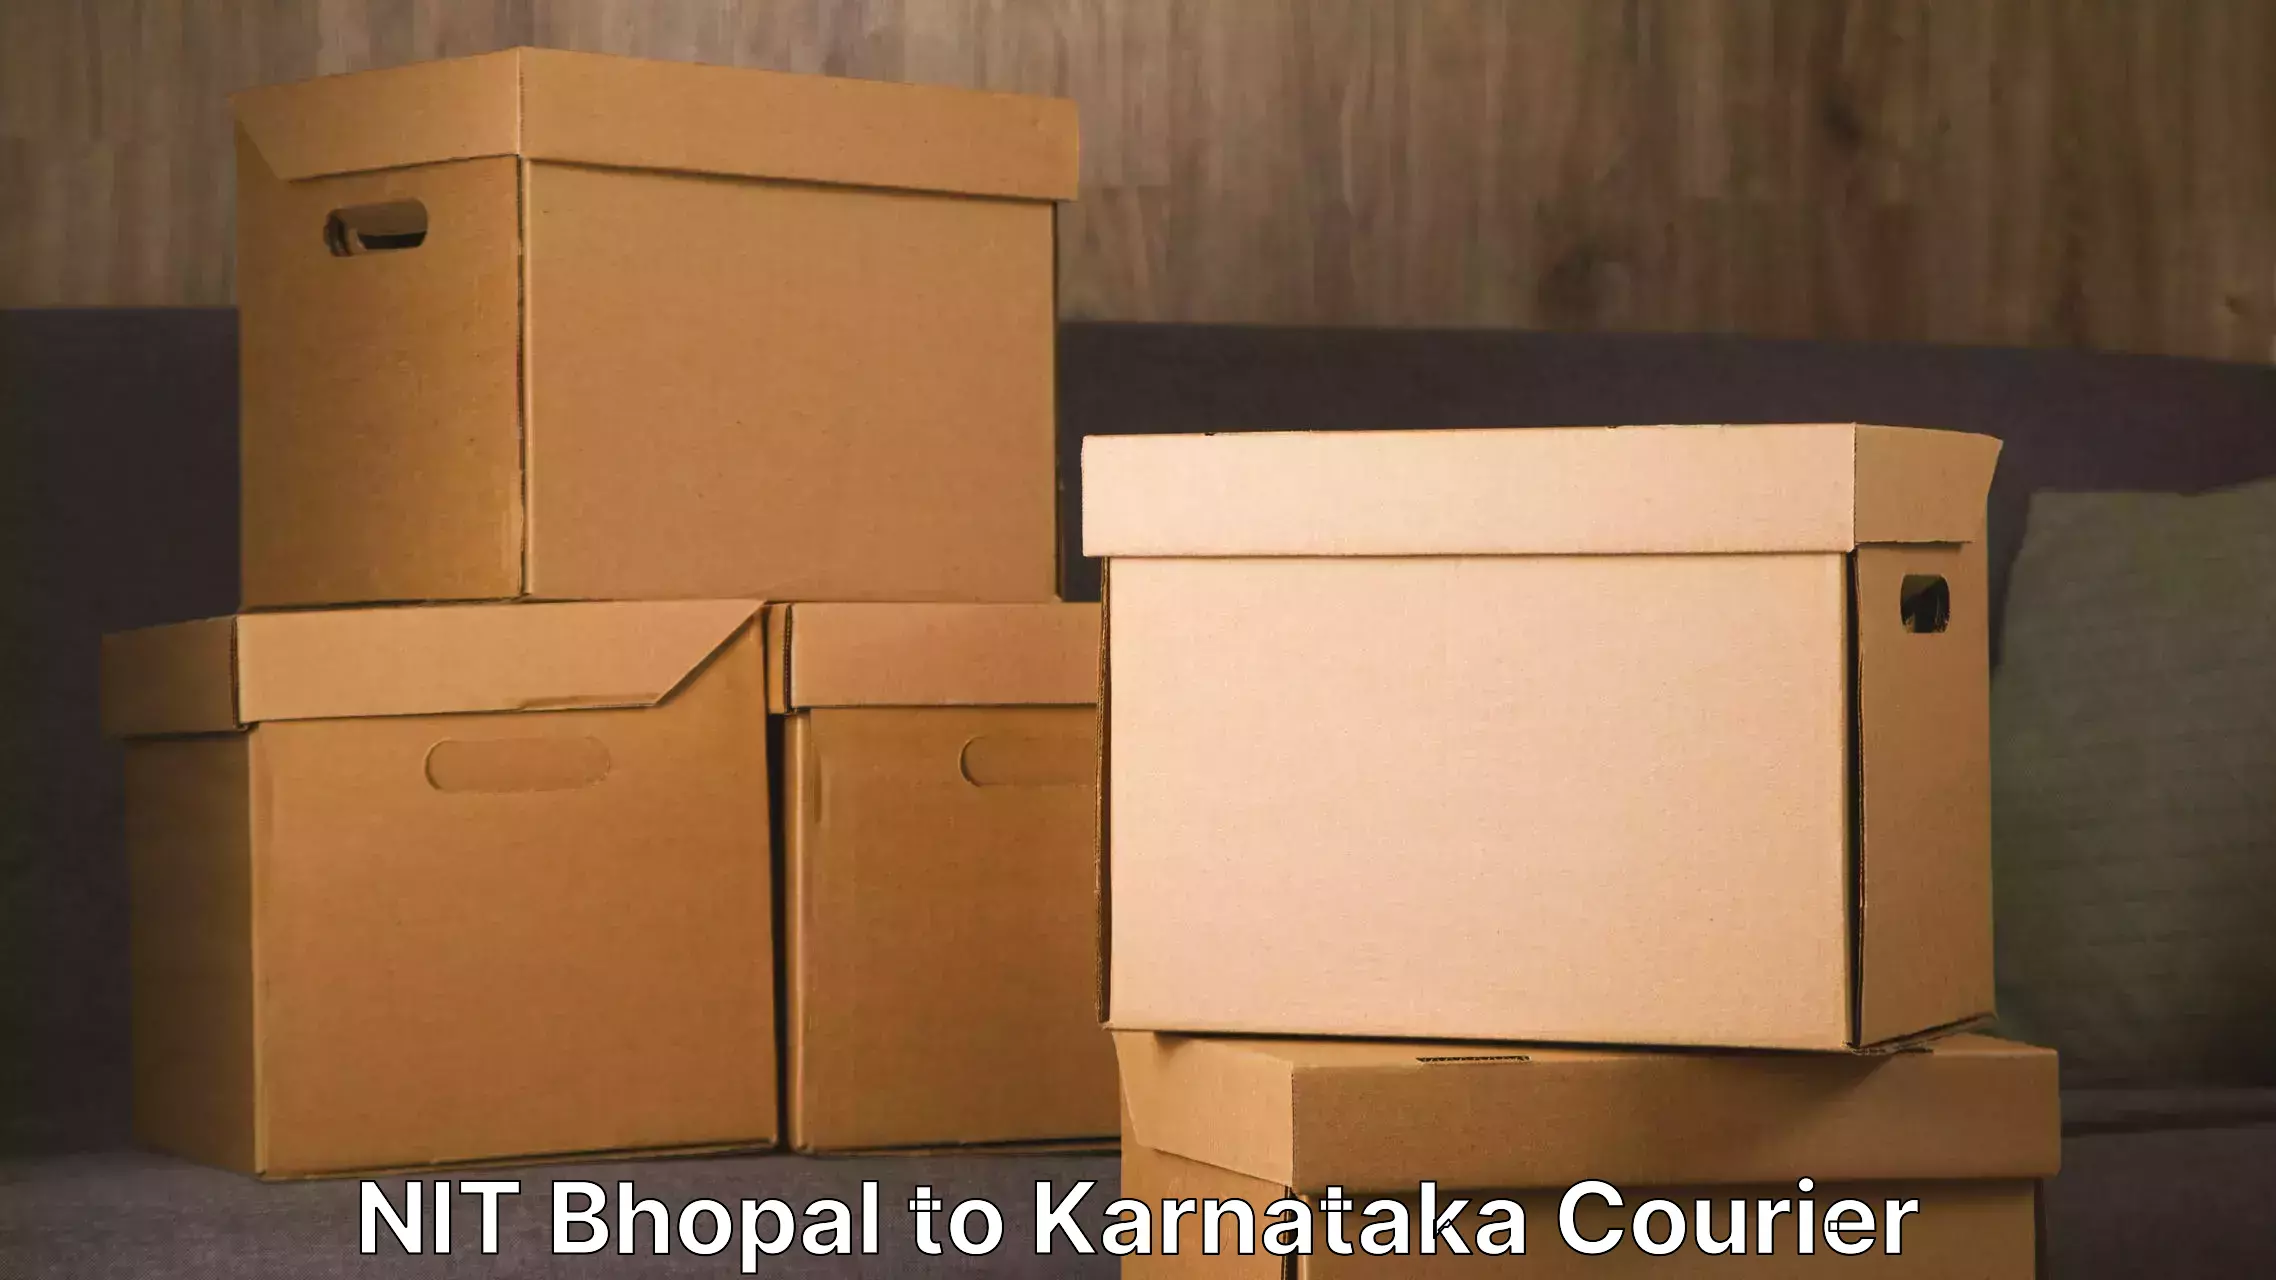 Quality moving and storage NIT Bhopal to Manipal Academy of Higher Education